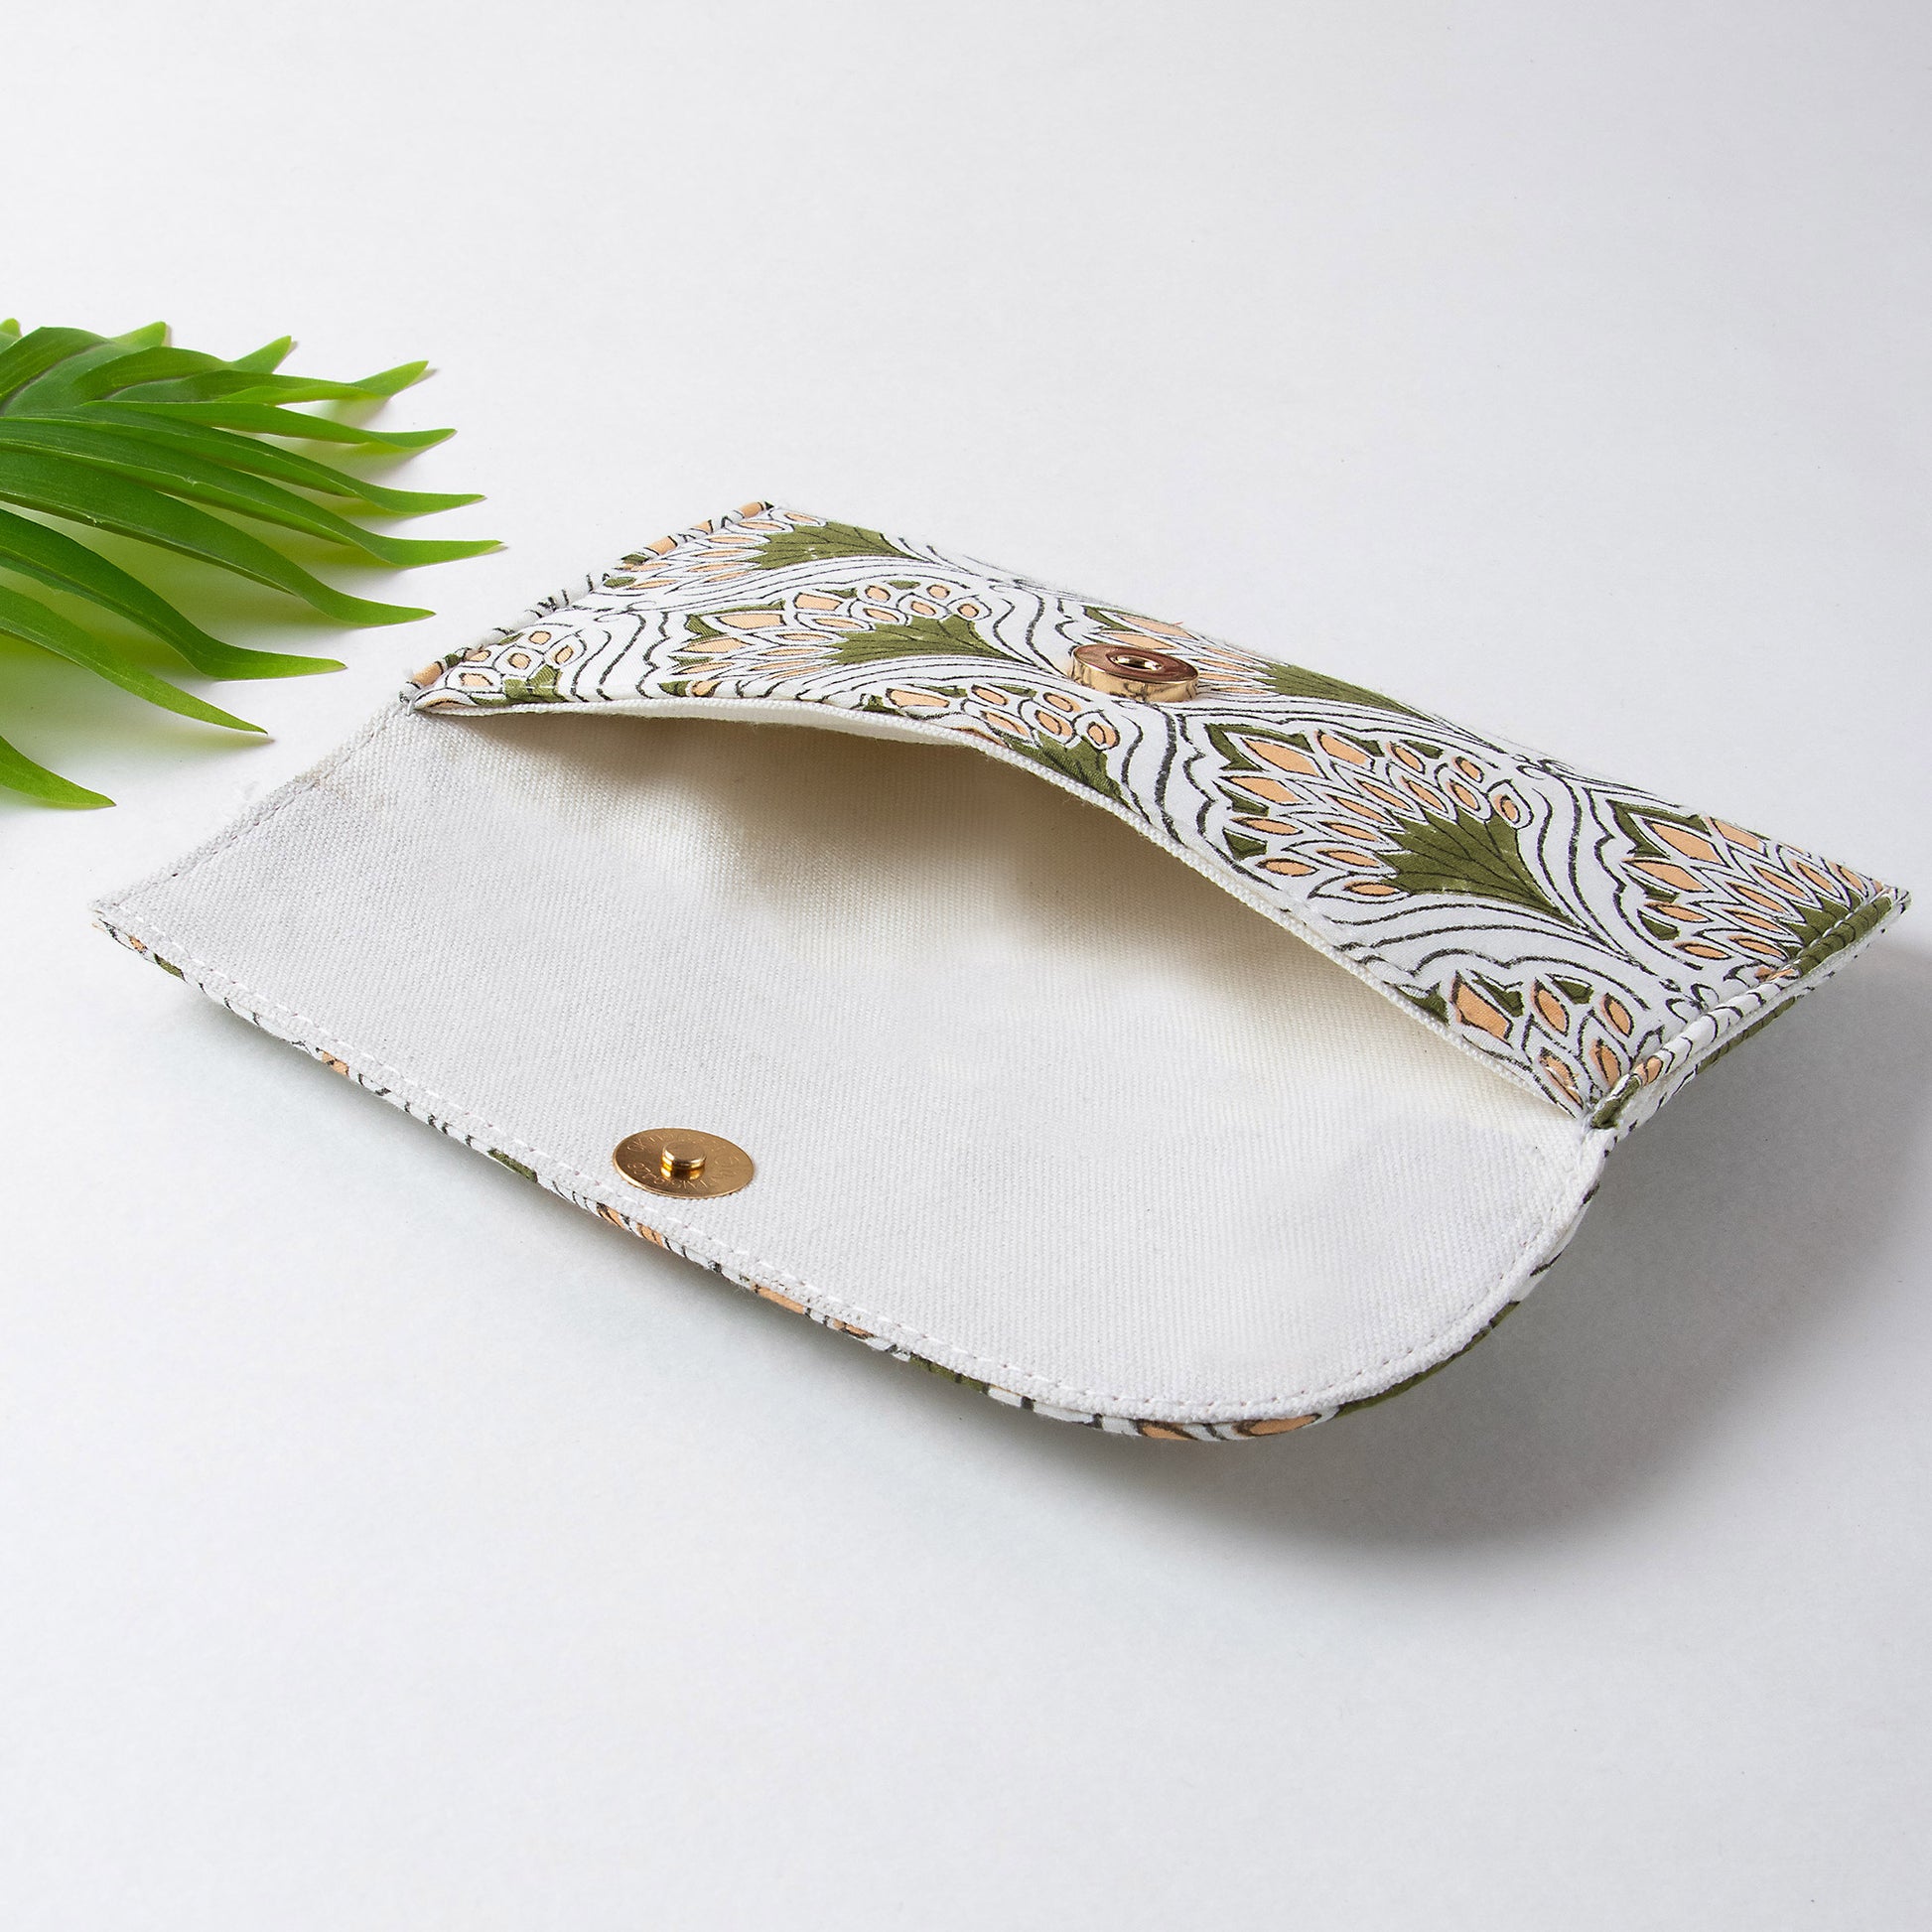 Green Floral Print Best Clutches For Women